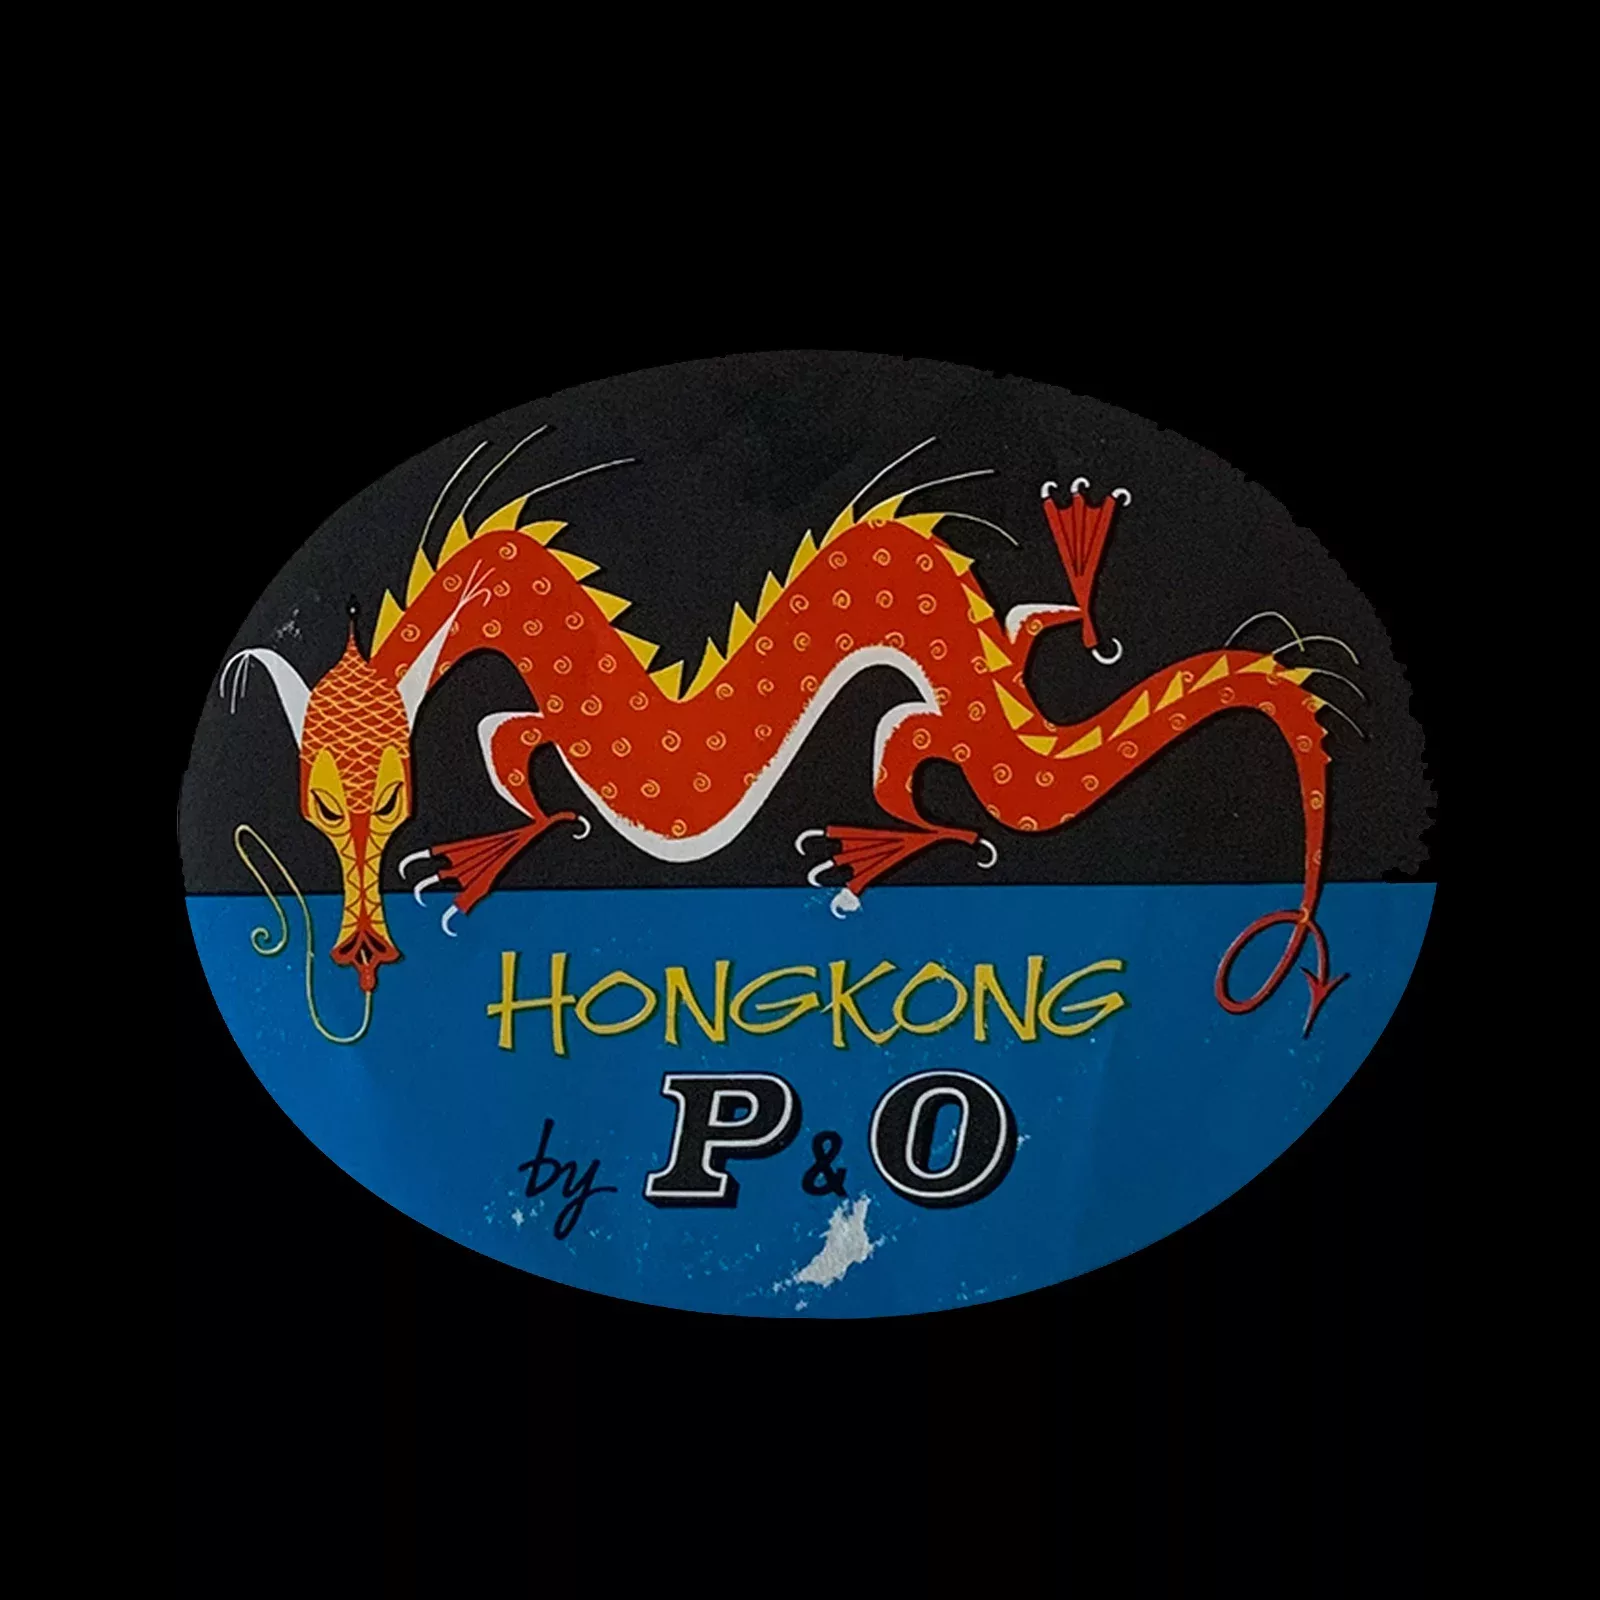 Hong Kong by P&O Luggage Label, 1950s